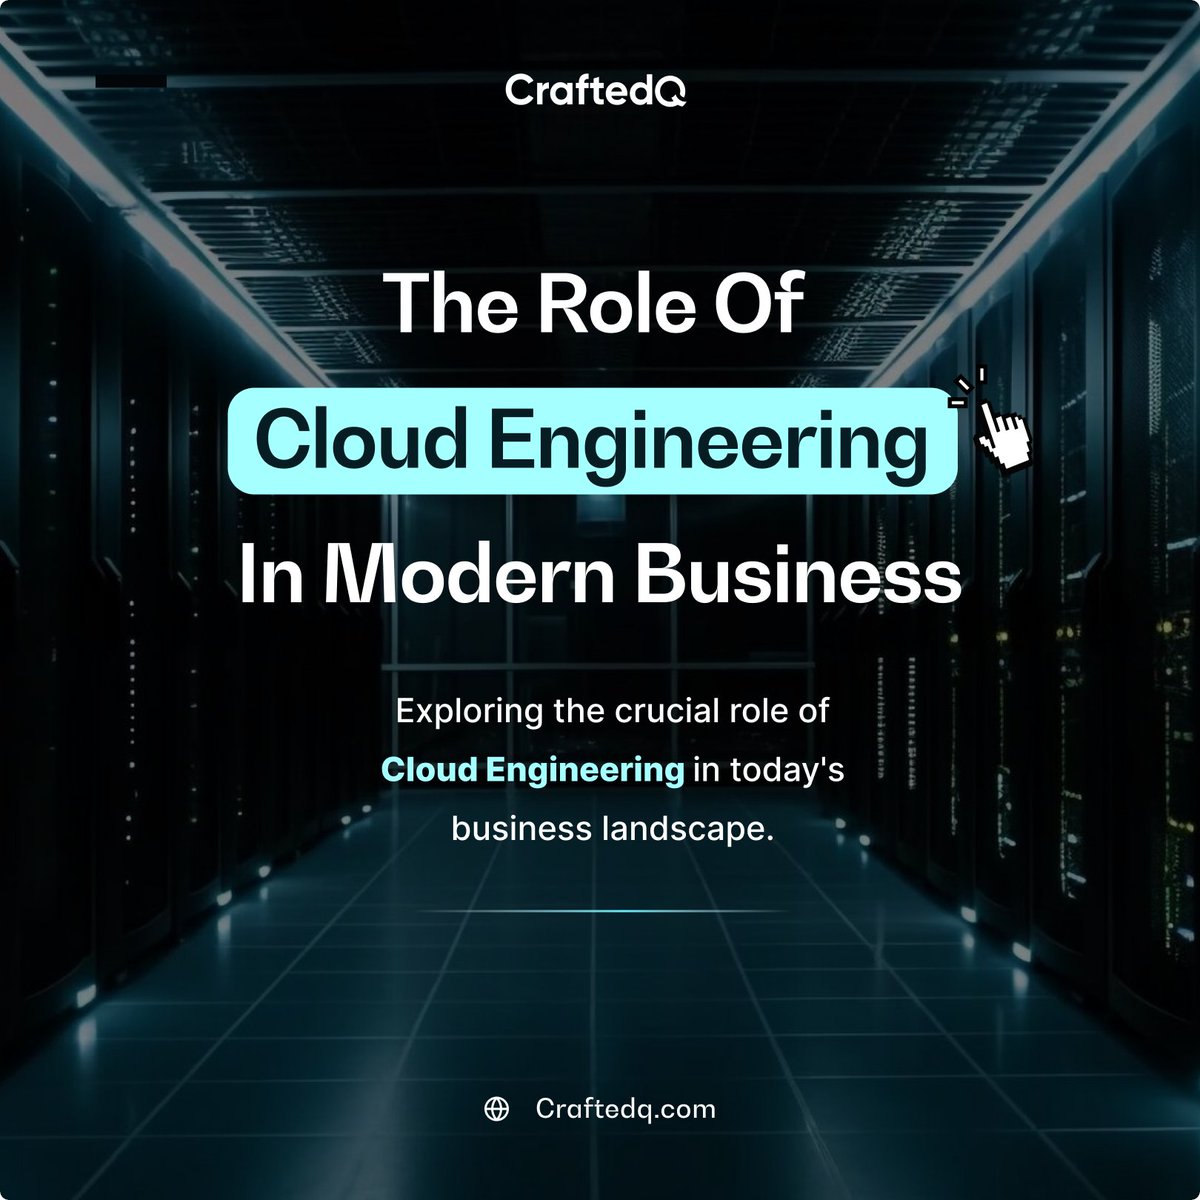 'CraftedQ is redefining the game with Cloud Engineering! 🌐 Experience innovation, flexibility, and security like never before. Your business journey just got brighter. #CraftedQ #CloudEngineering #Innovation'
#BusinessTransformation #CloudSolutions'